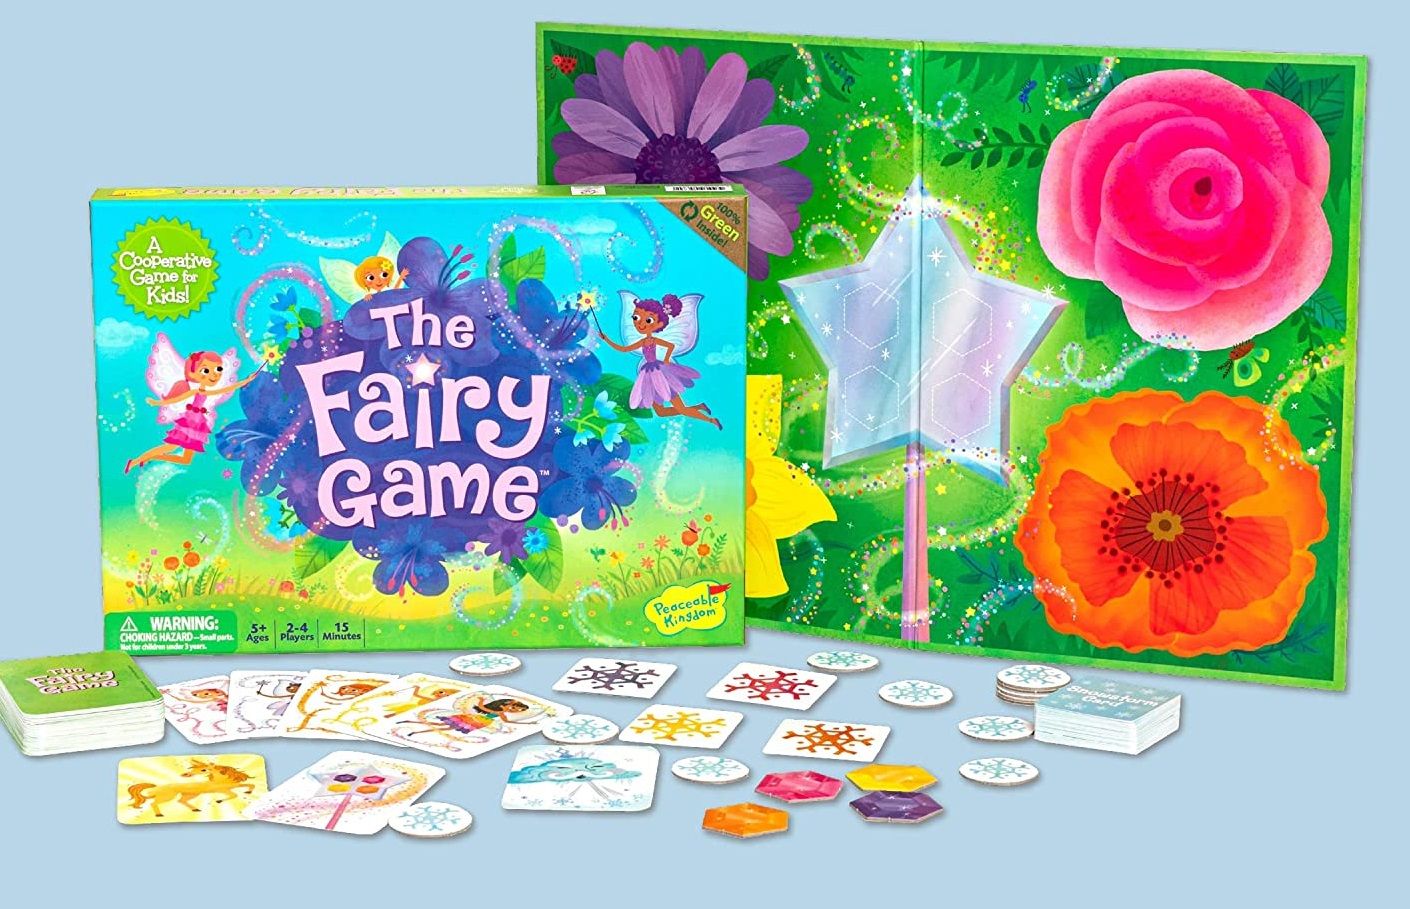 The Fairy Game is one of the most beautiful board games for kids